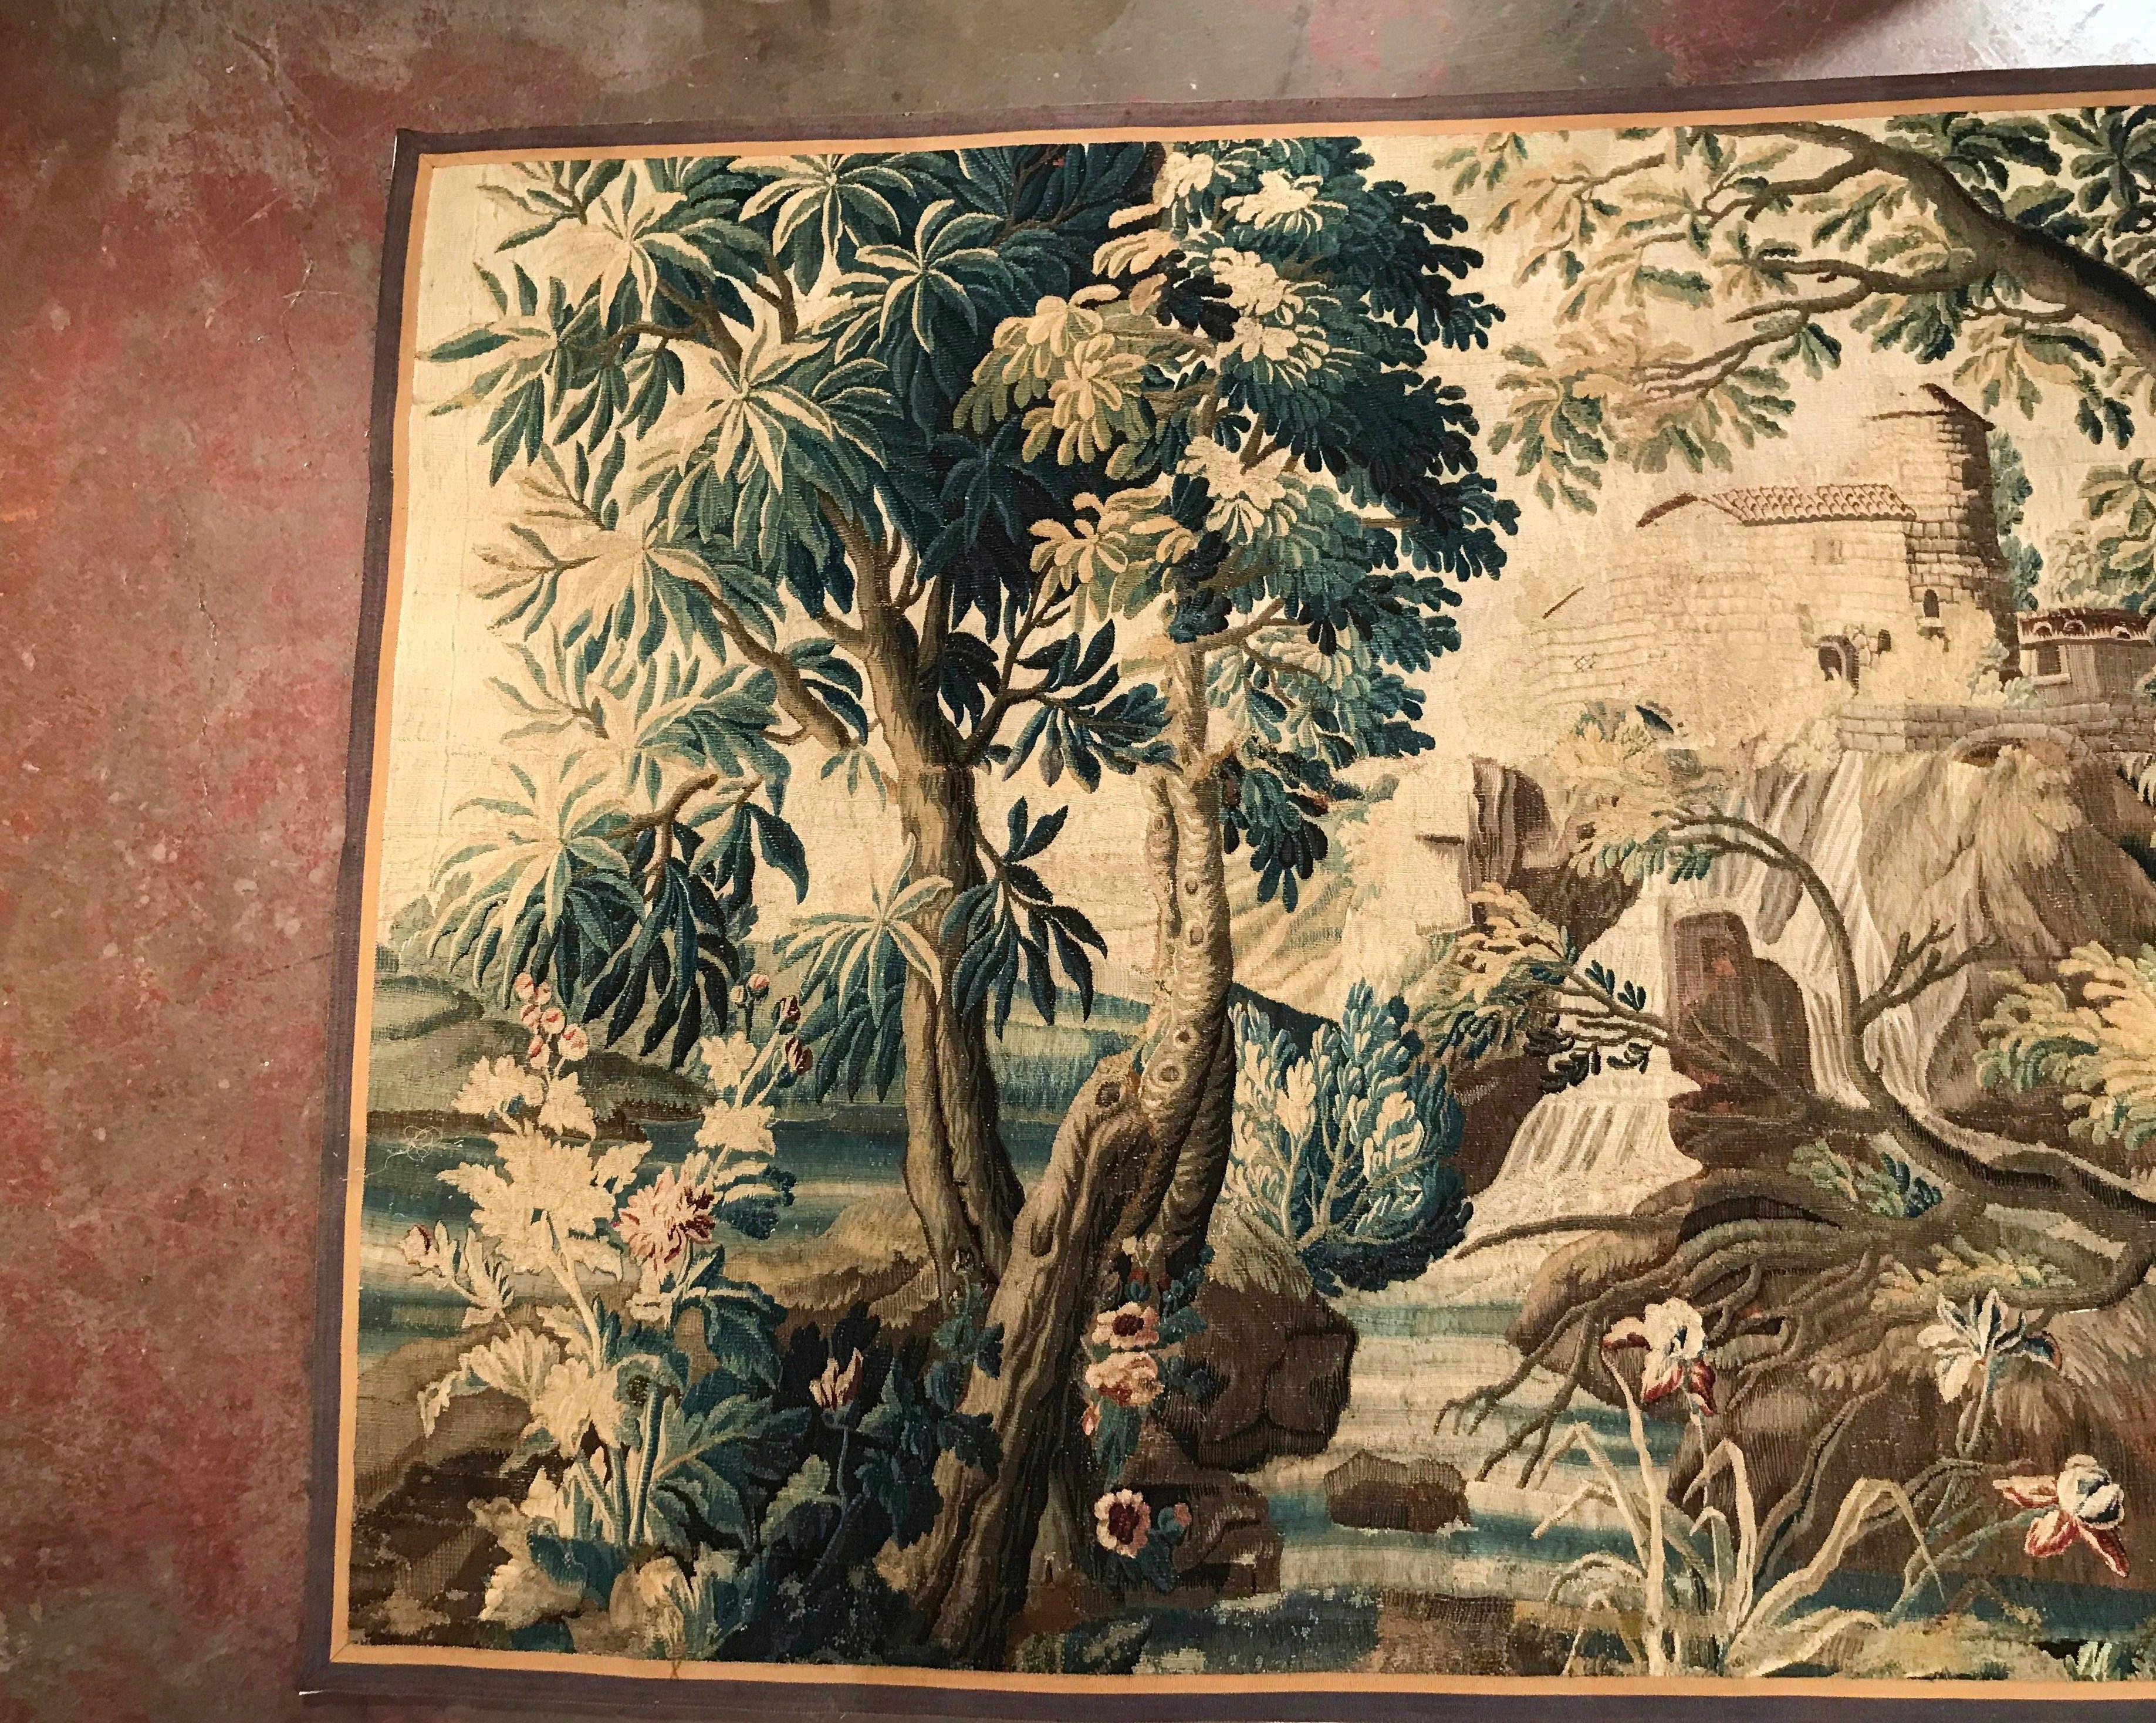 This colorful antique tapestry was found in Versailles, France; handwoven in the village of Aubusson, the wall hanging piece features foliage decor with a running stream, an old structure in the background and a large bird standing on a fence. The